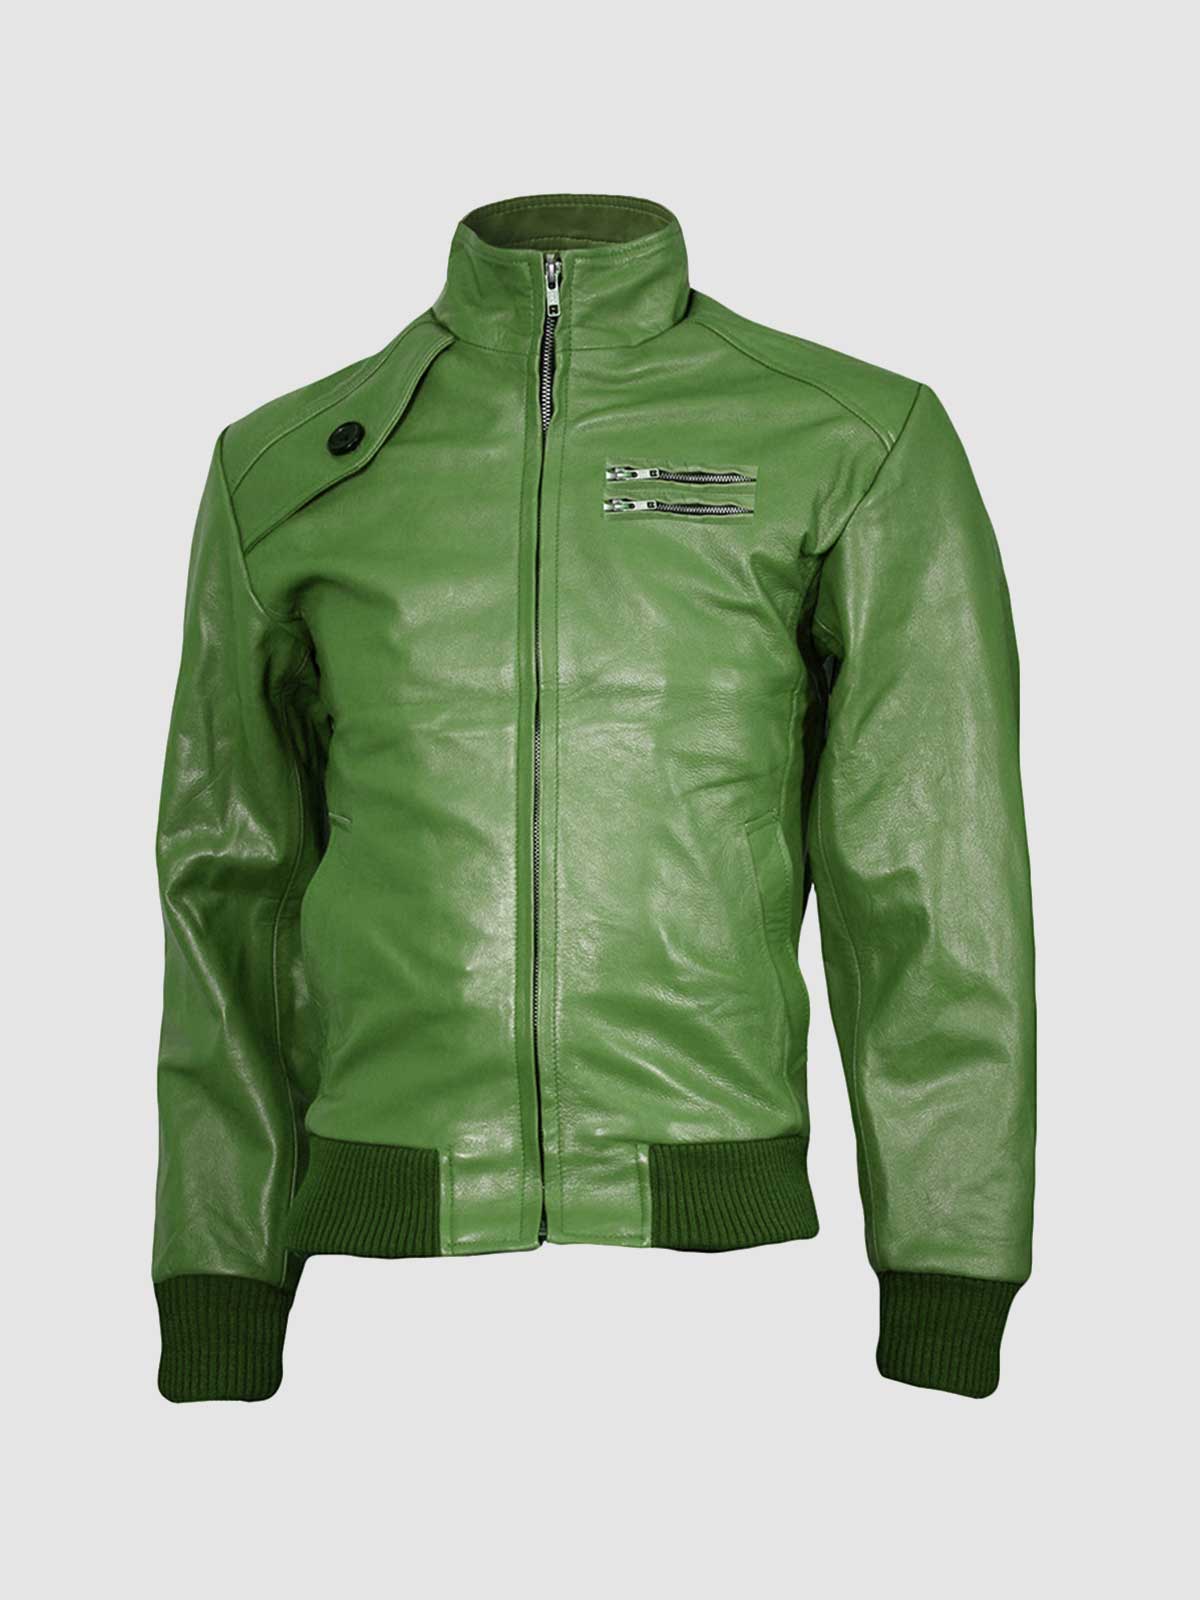 Shop Green Leather Jacket Mens at good price 